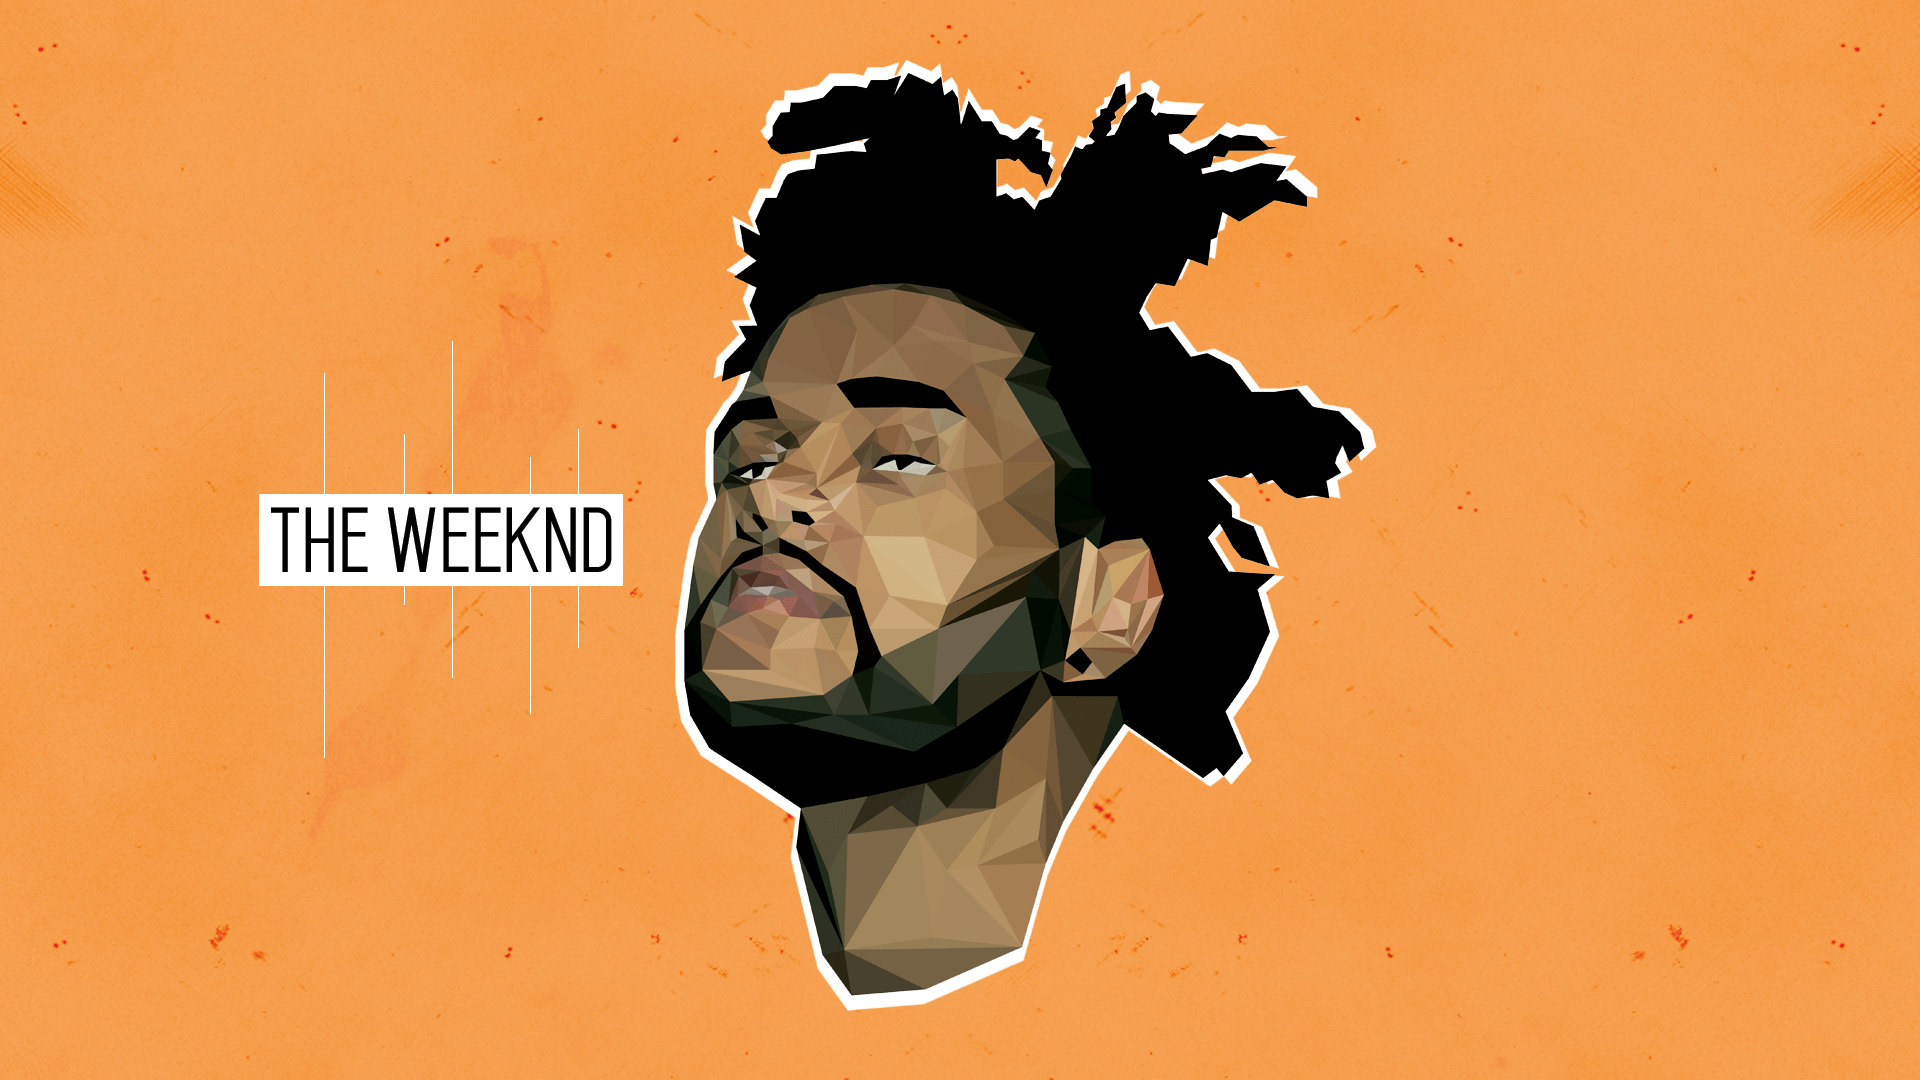 The weekend come through перевод. The Weeknd обложка. The Weeknd рисунок. The Weeknd Постер. The Weeknd плакат.